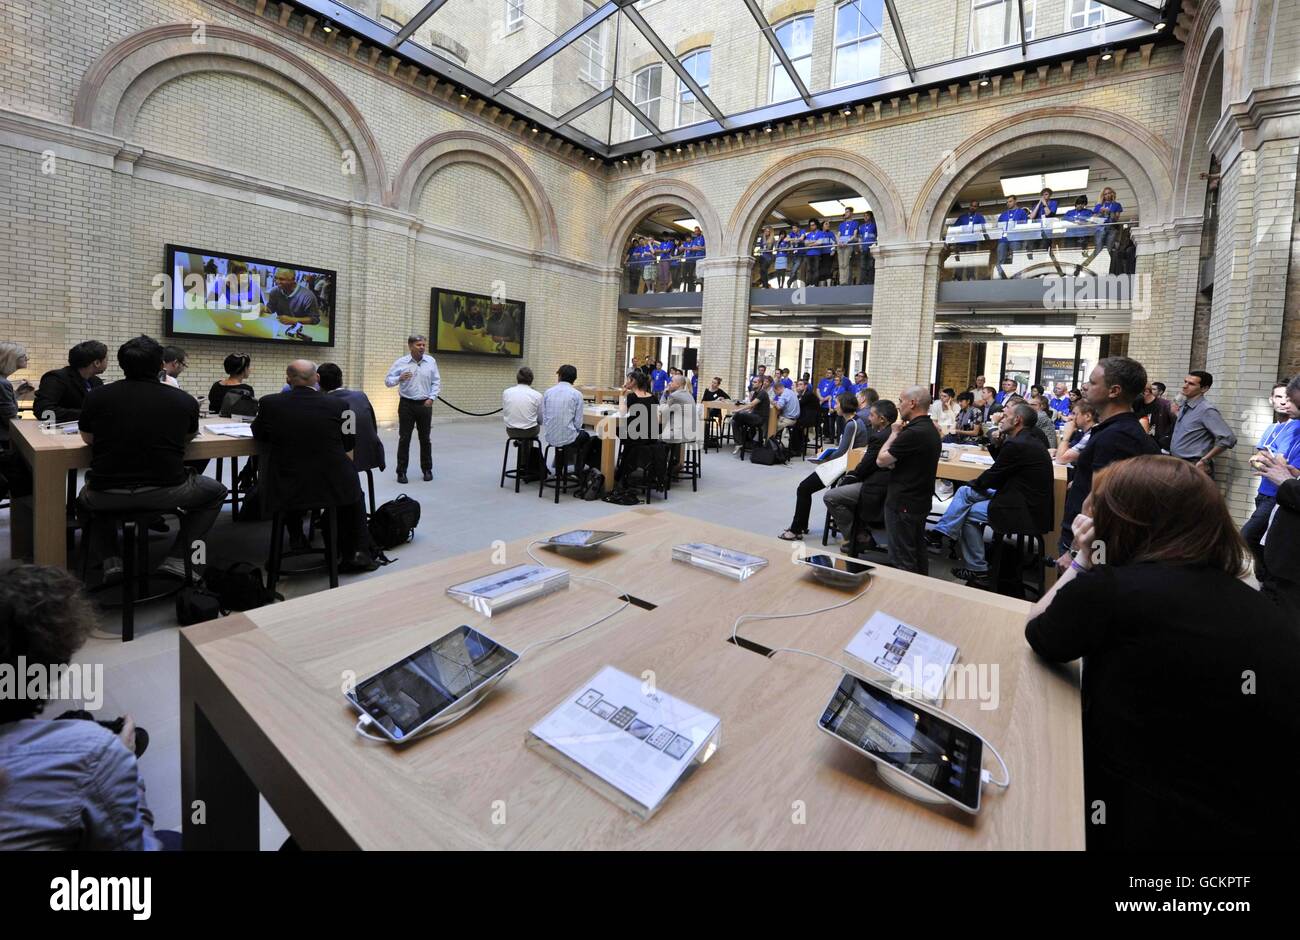 Ron Johnson, Apple's Senior Vice President of Retail Operations makes a presentation to media and new staff at the company's new store in London's Covent Garden ahead of it's opening on Saturday. Stock Photo